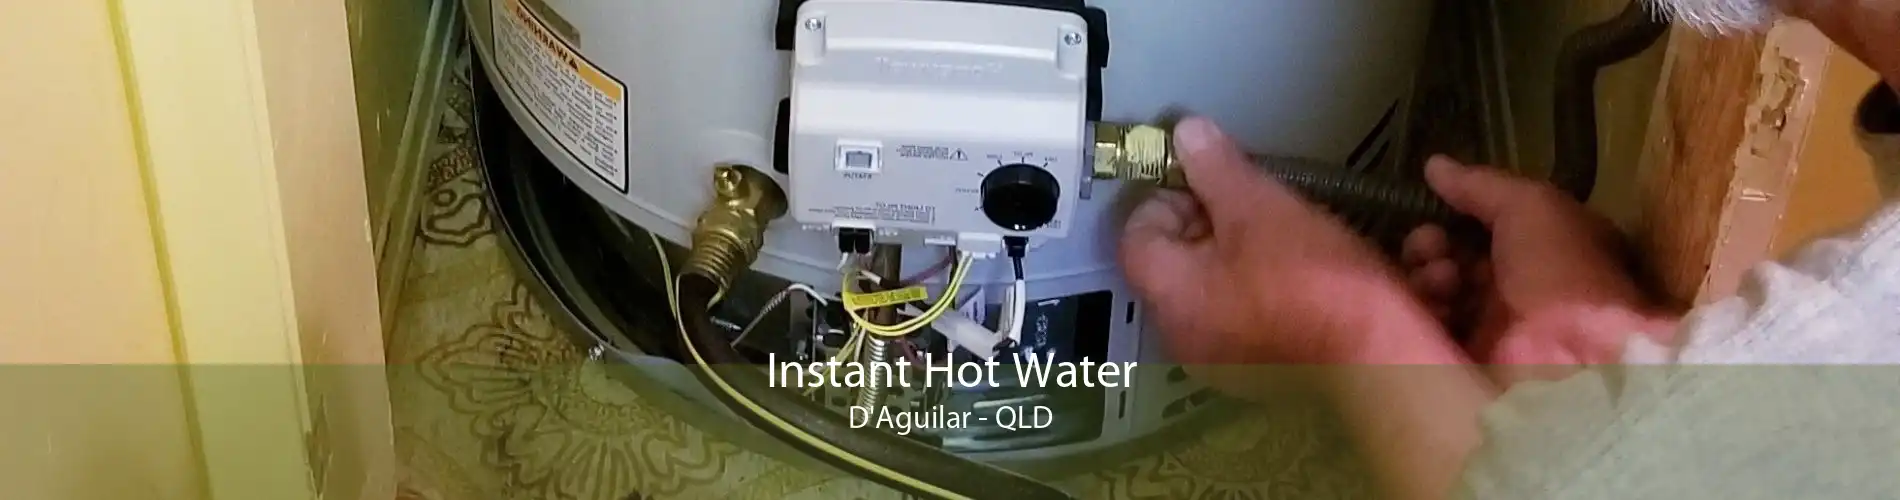 Instant Hot Water D'Aguilar - QLD